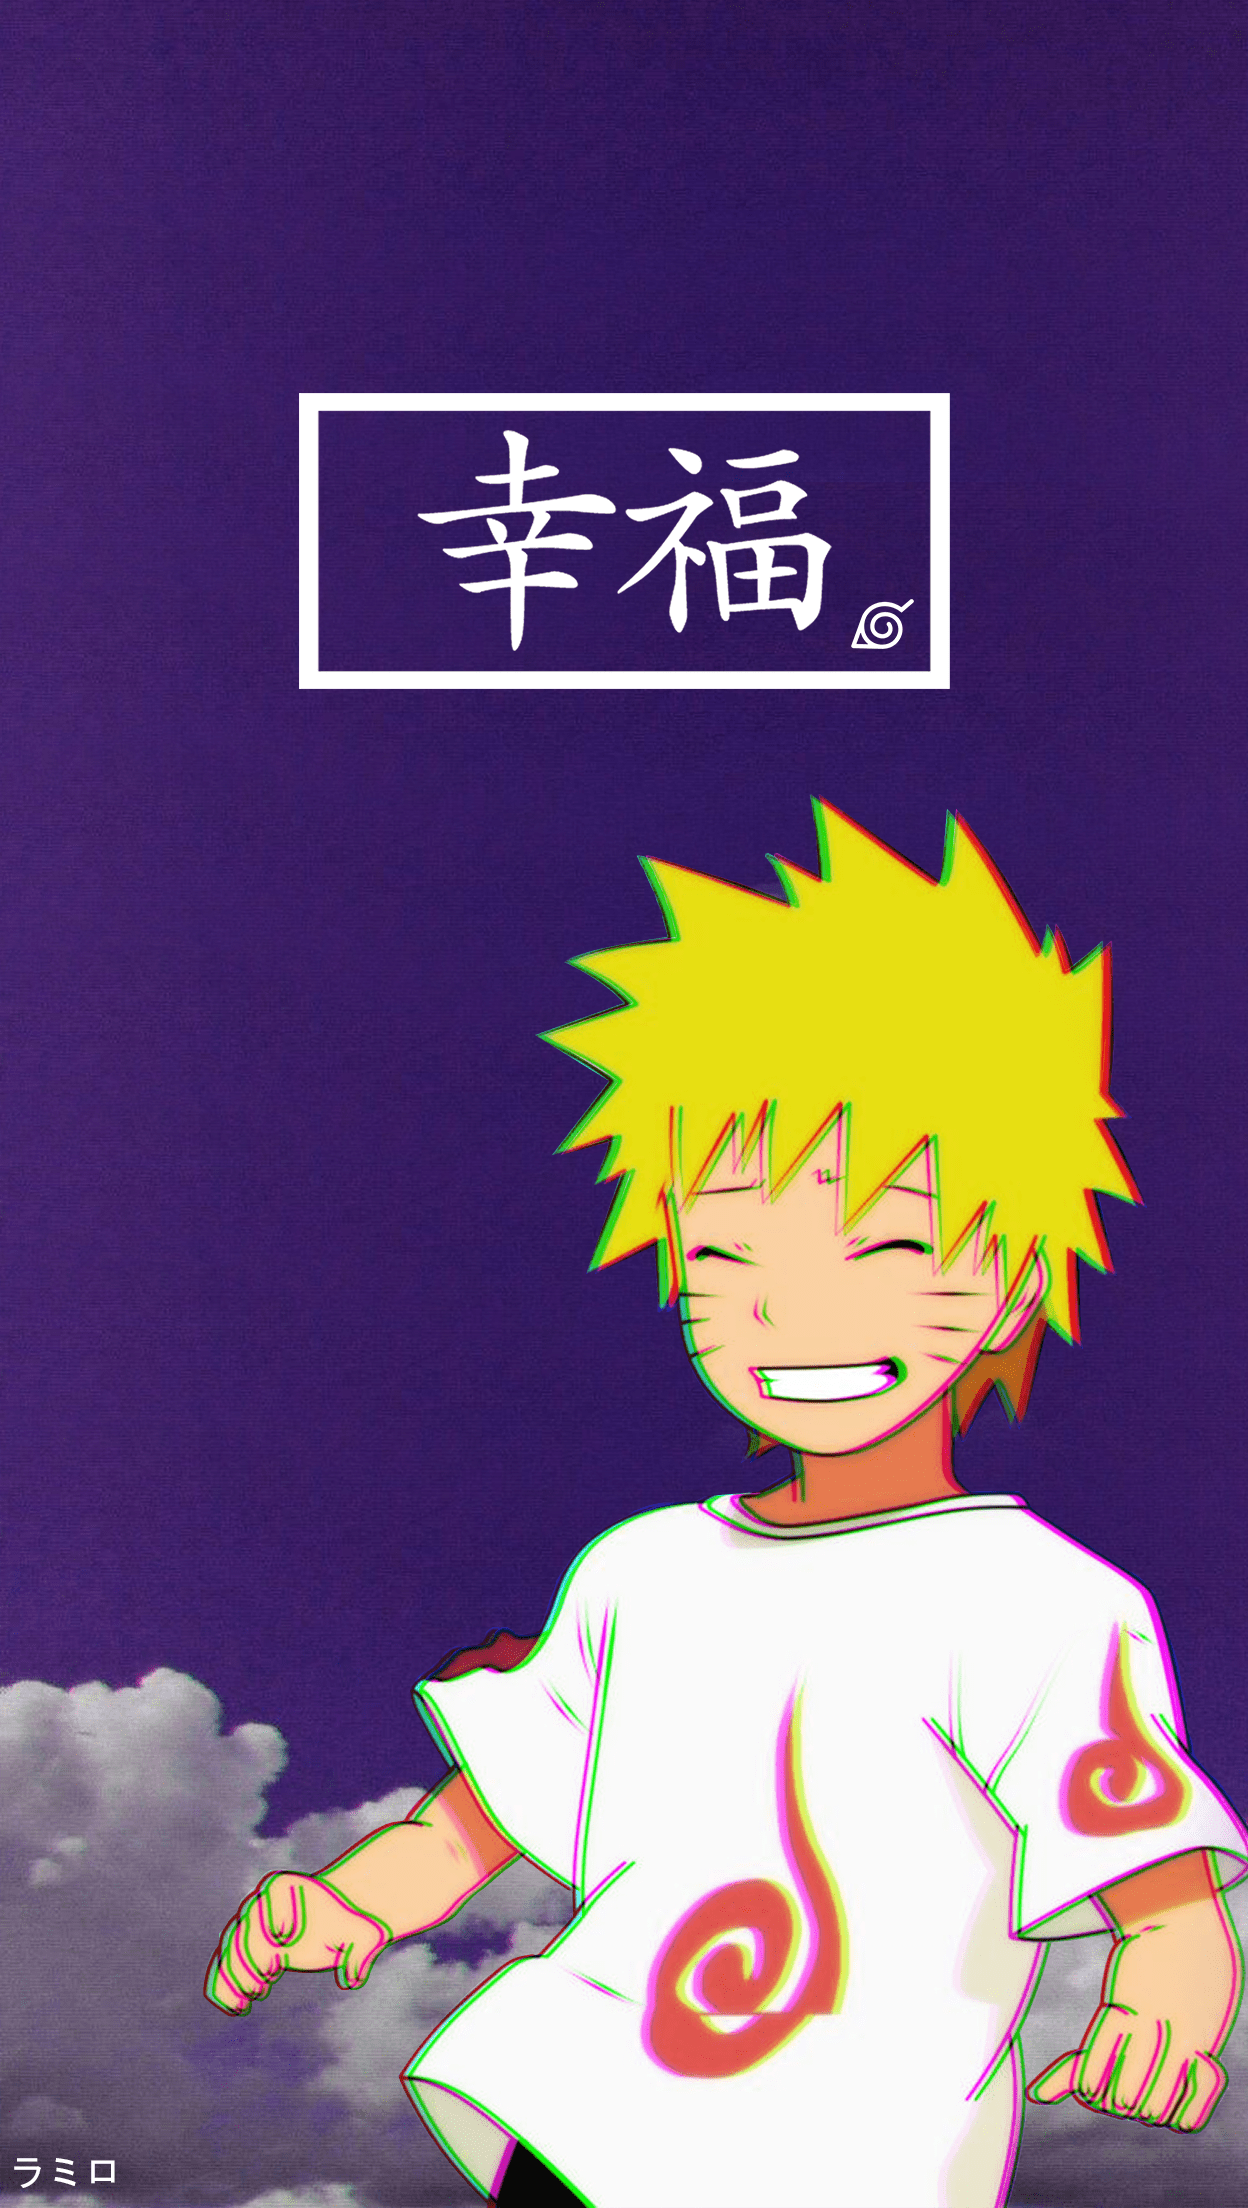 Naruto Wallpaper Aesthetic | Quotes and Wallpaper J